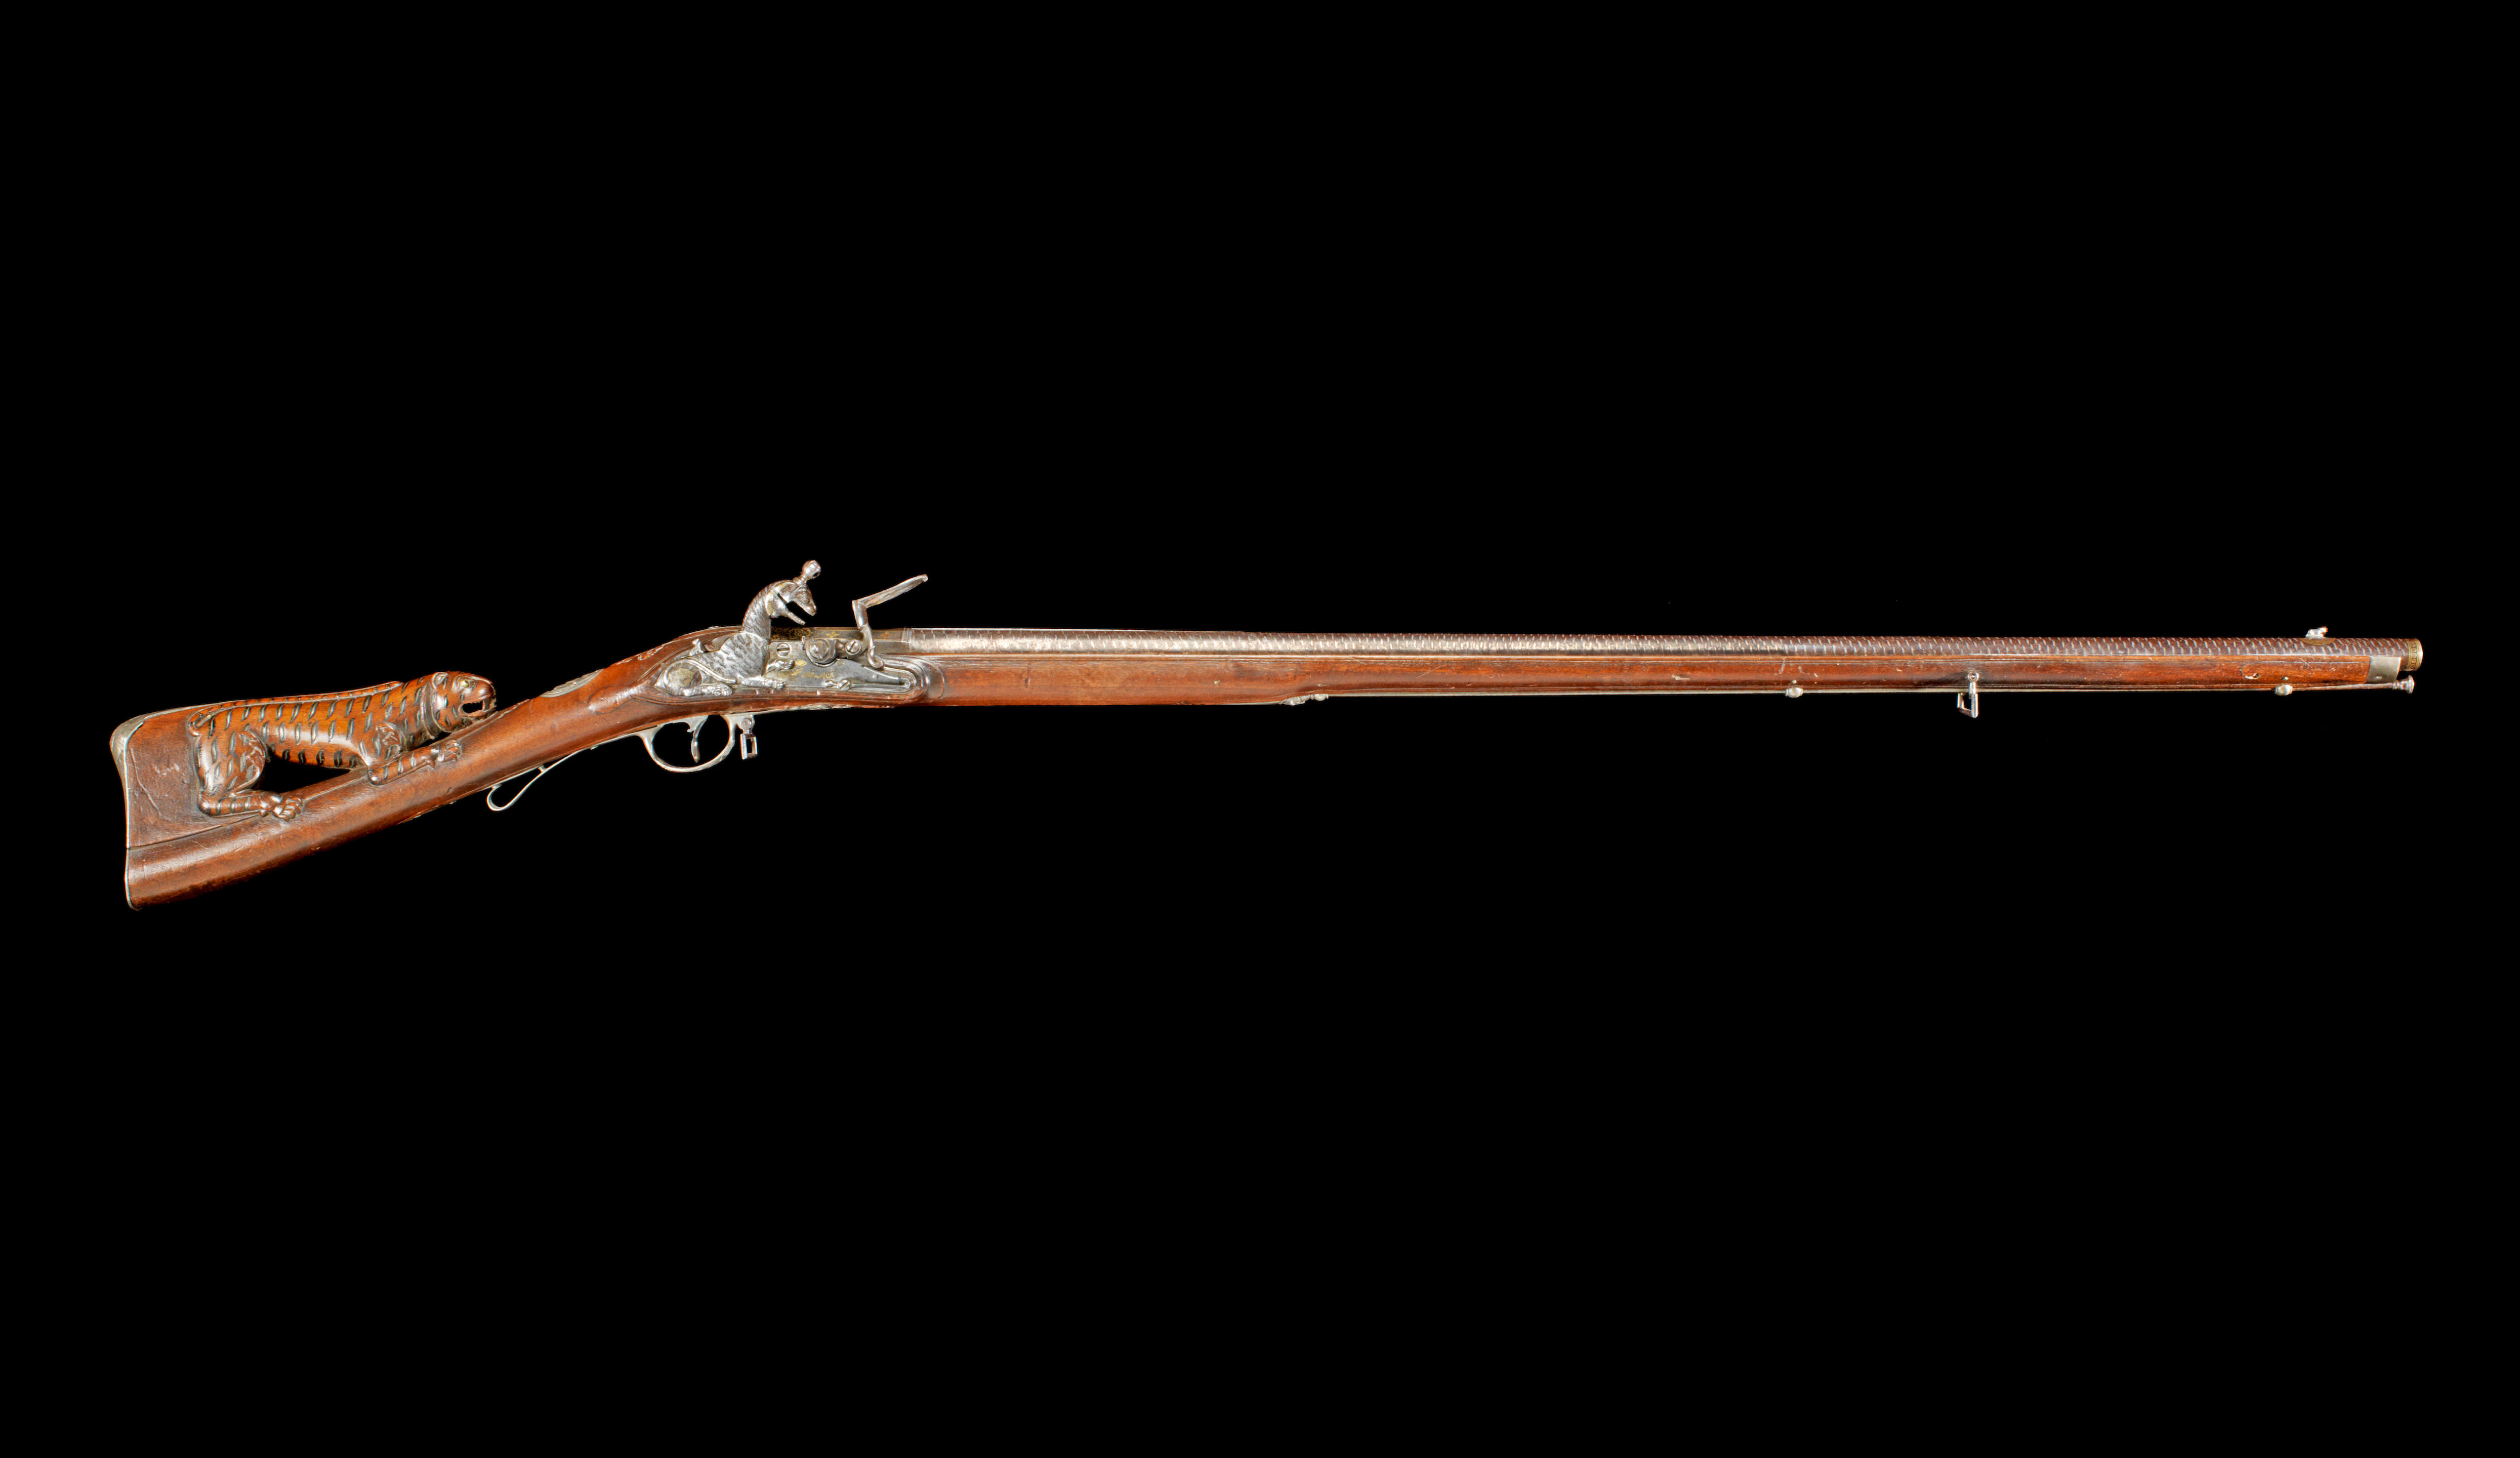 Bonhams : A magnificent two shot superimposed-load silver-mounted Flintlock  Sporting Gun from the personal armoury of Tipu Sultan, by Asad Khan-e  Muhammad Seringapatam, dated Mawludi 1222/ AD 1793-94